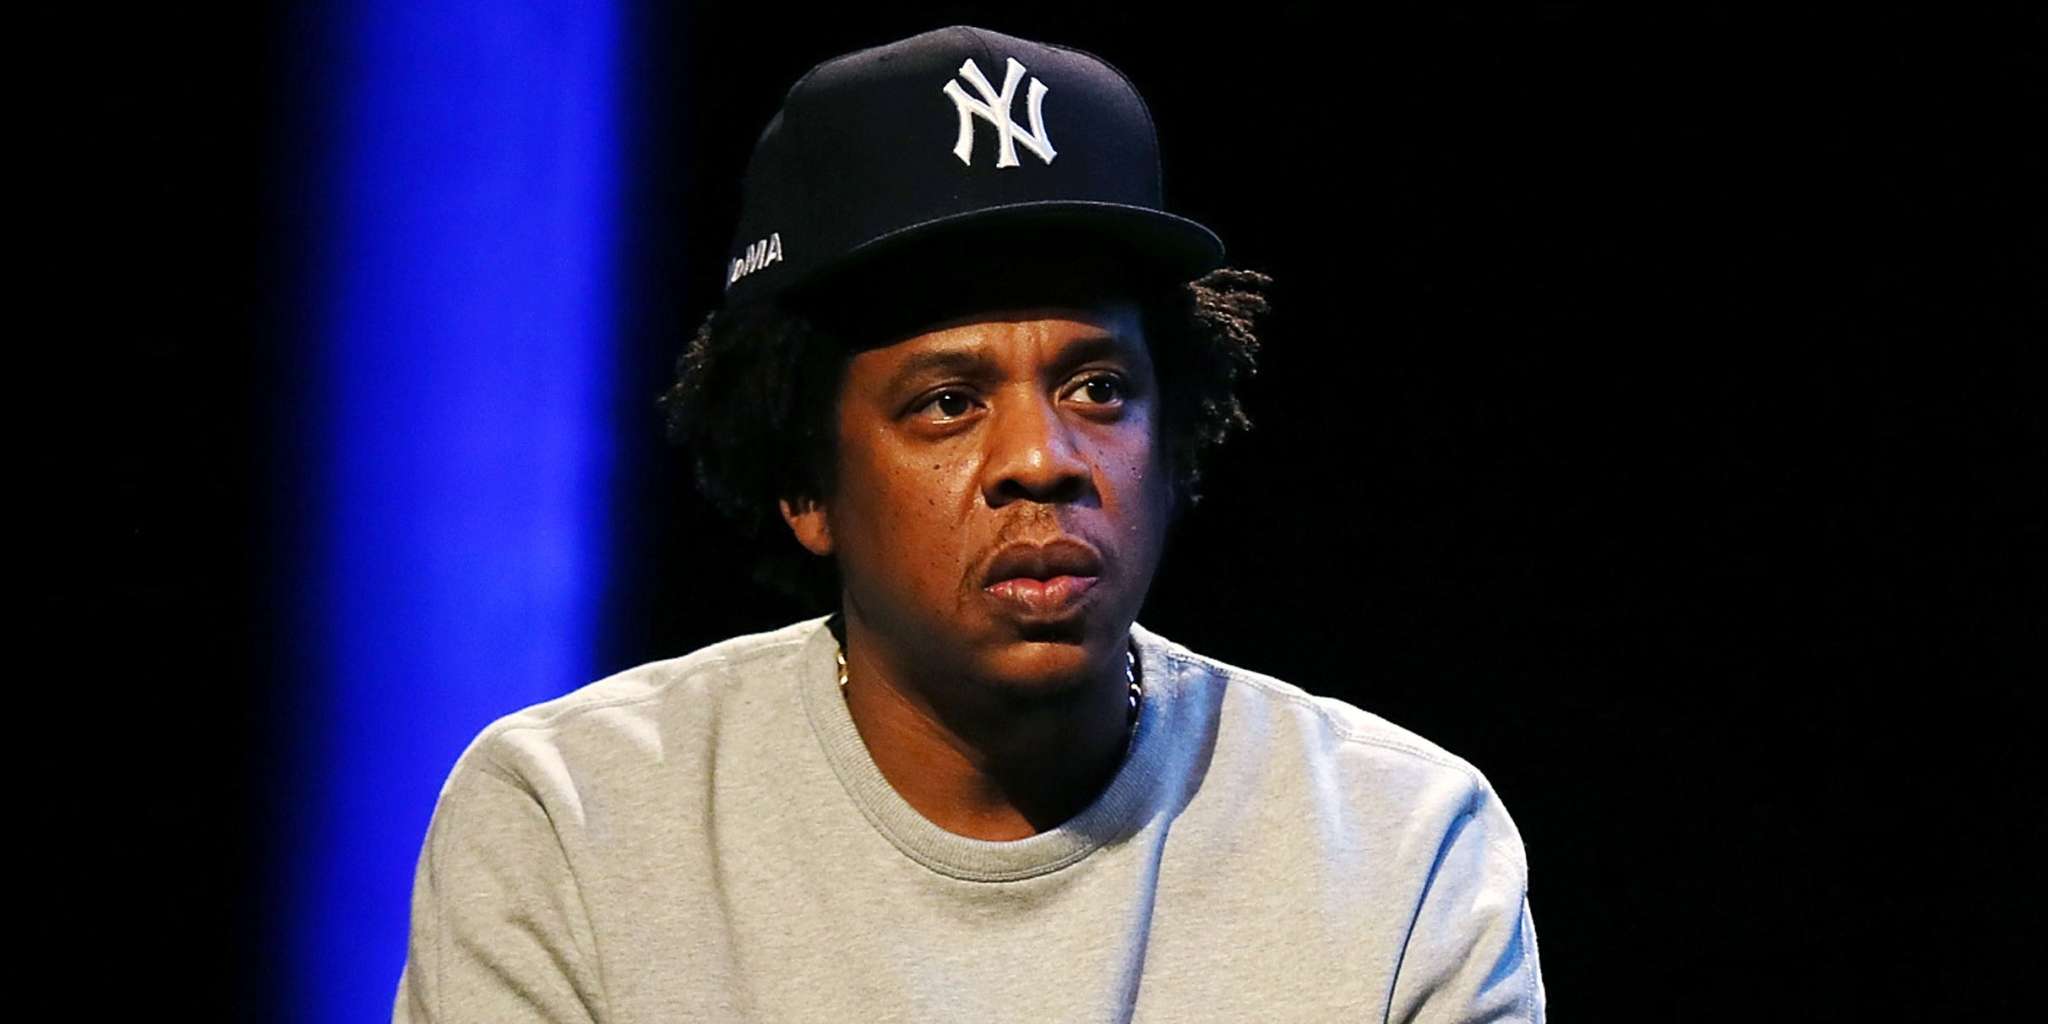 ”jay-z-pleads-with-officials-to-prosecute-all-4-policemen-involved-in-the-killing-of-george-floyd-in-powerful-statement”